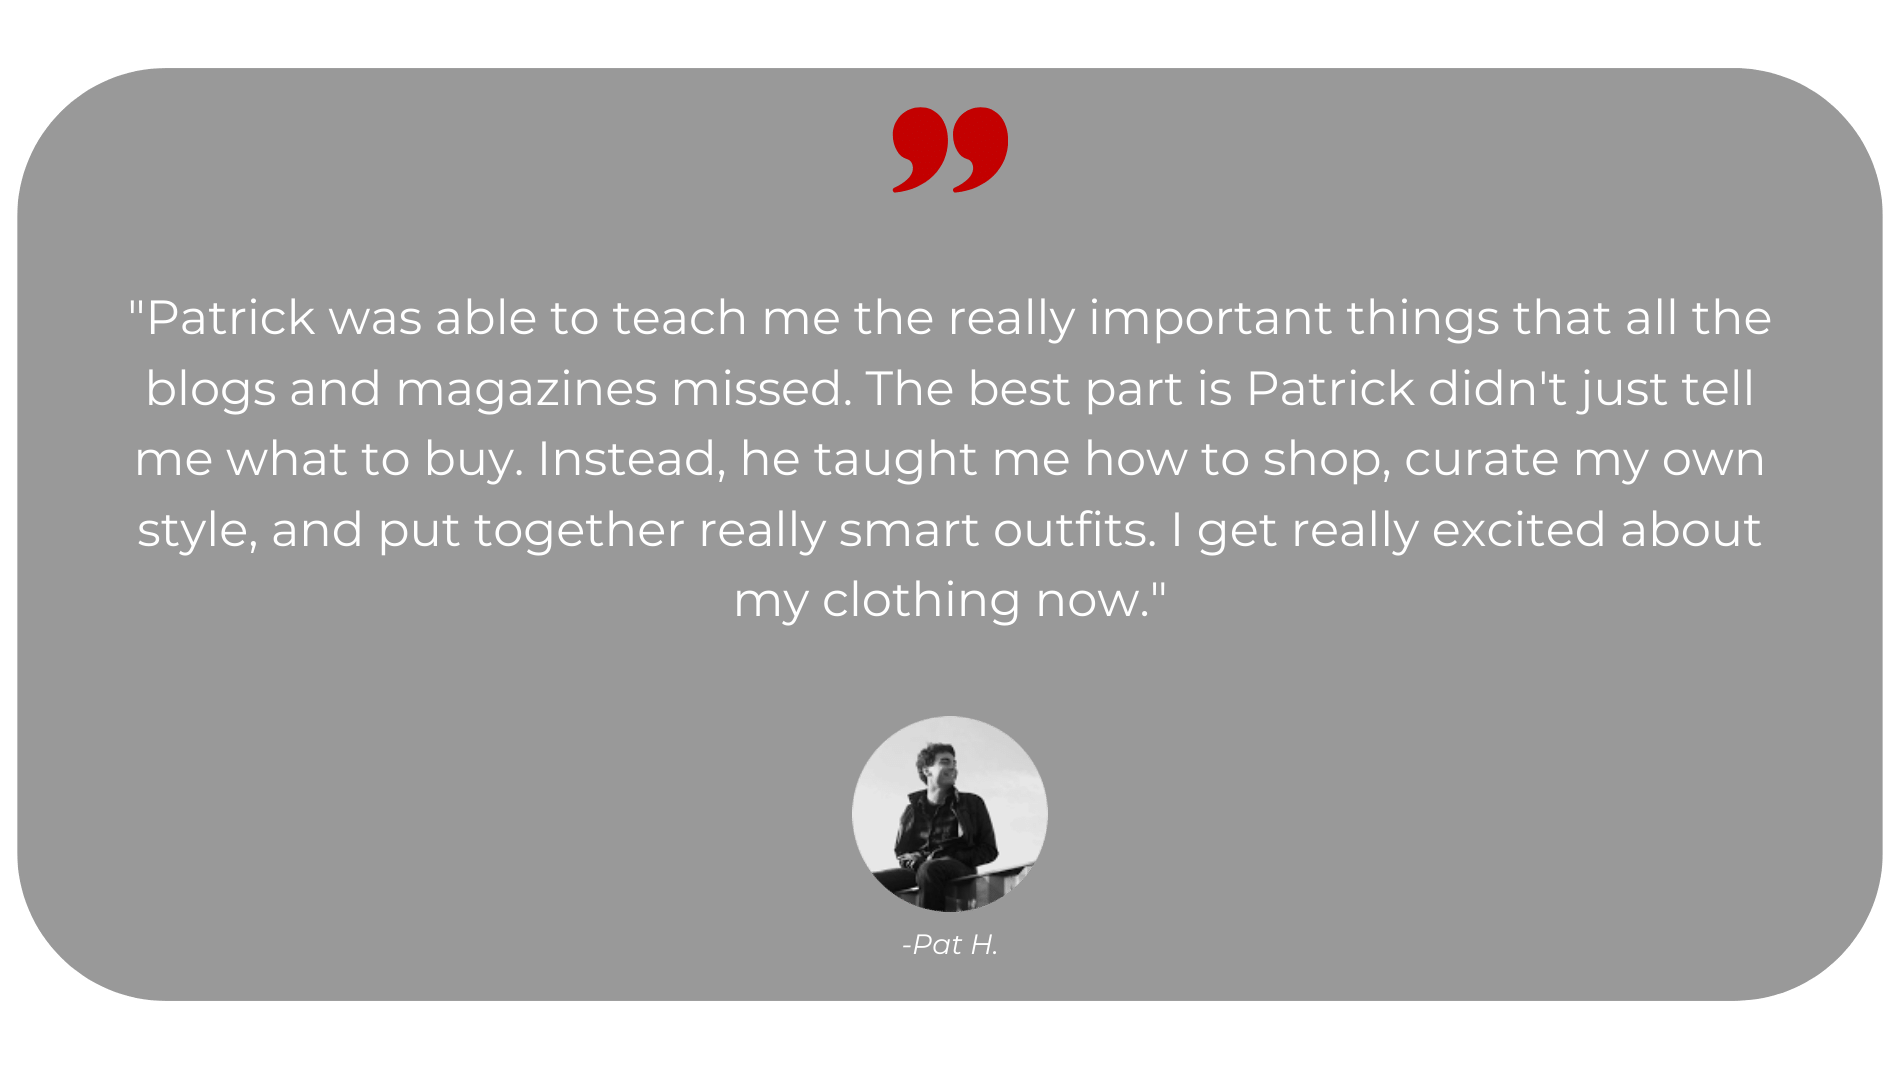 personal-stylist-Pivot-Image-consulting-review (49)-min.png